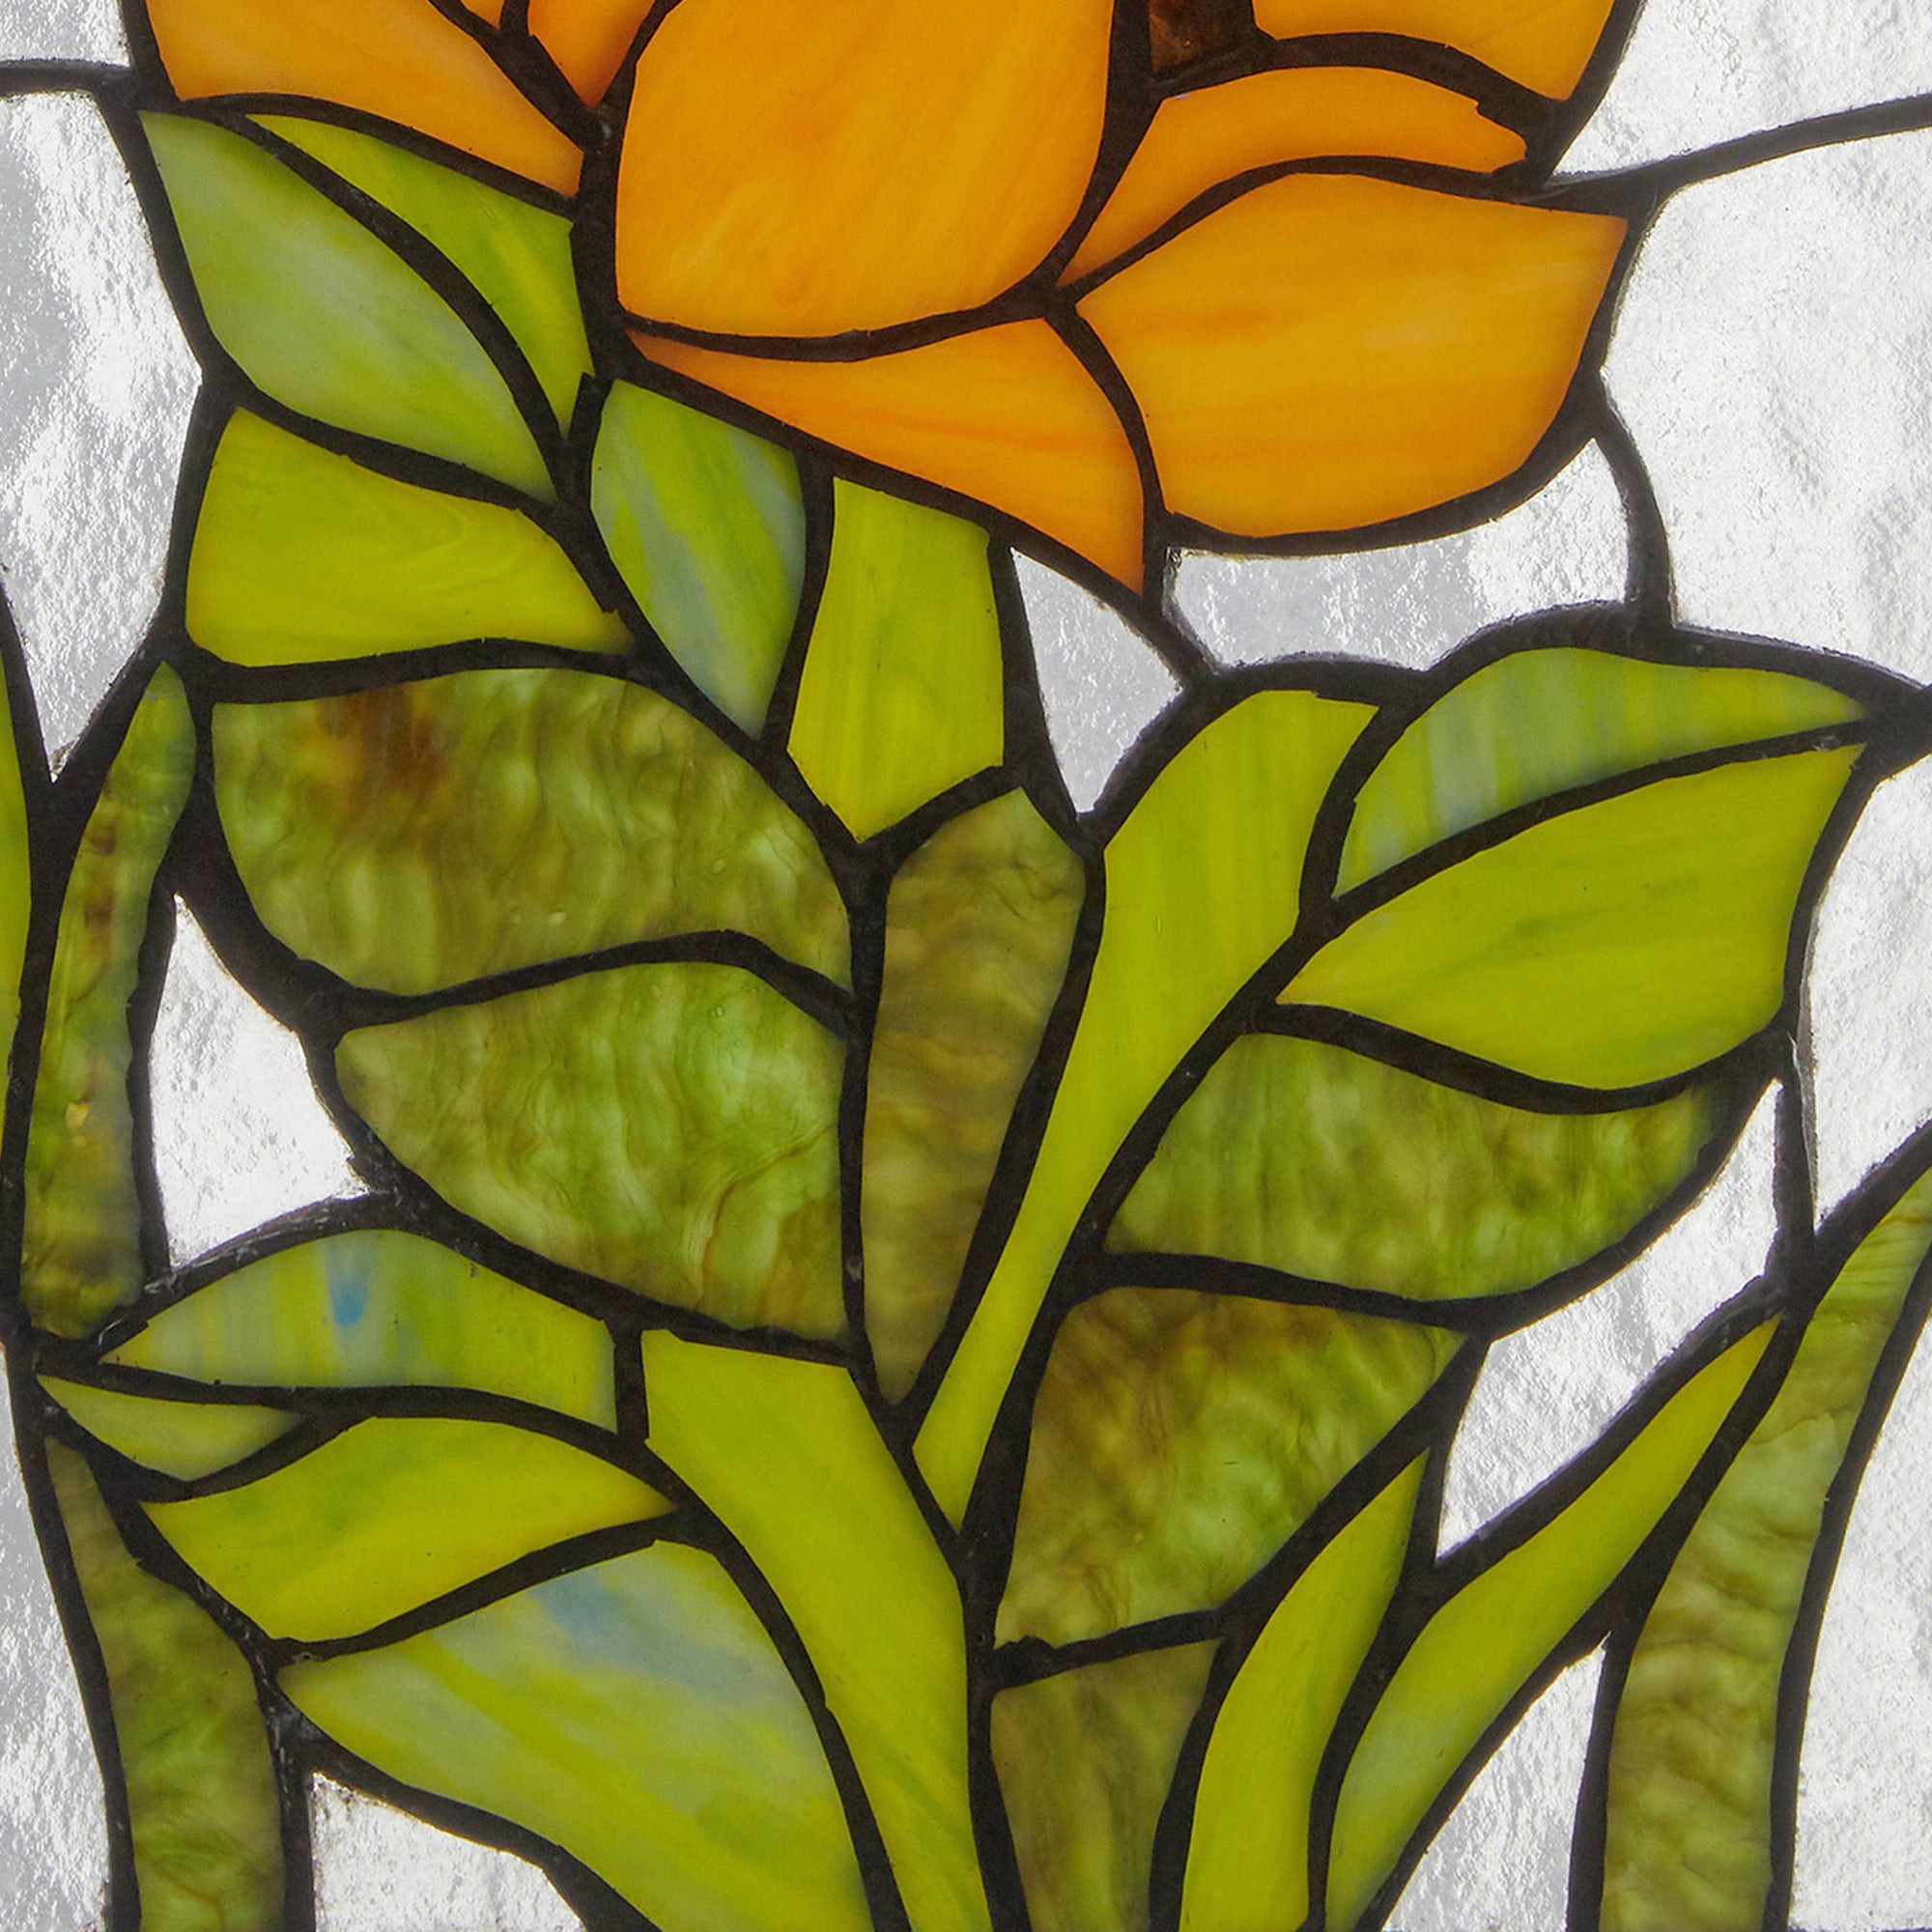 Multicolored Sunflower Stained Glass Window Panel 11.25”H